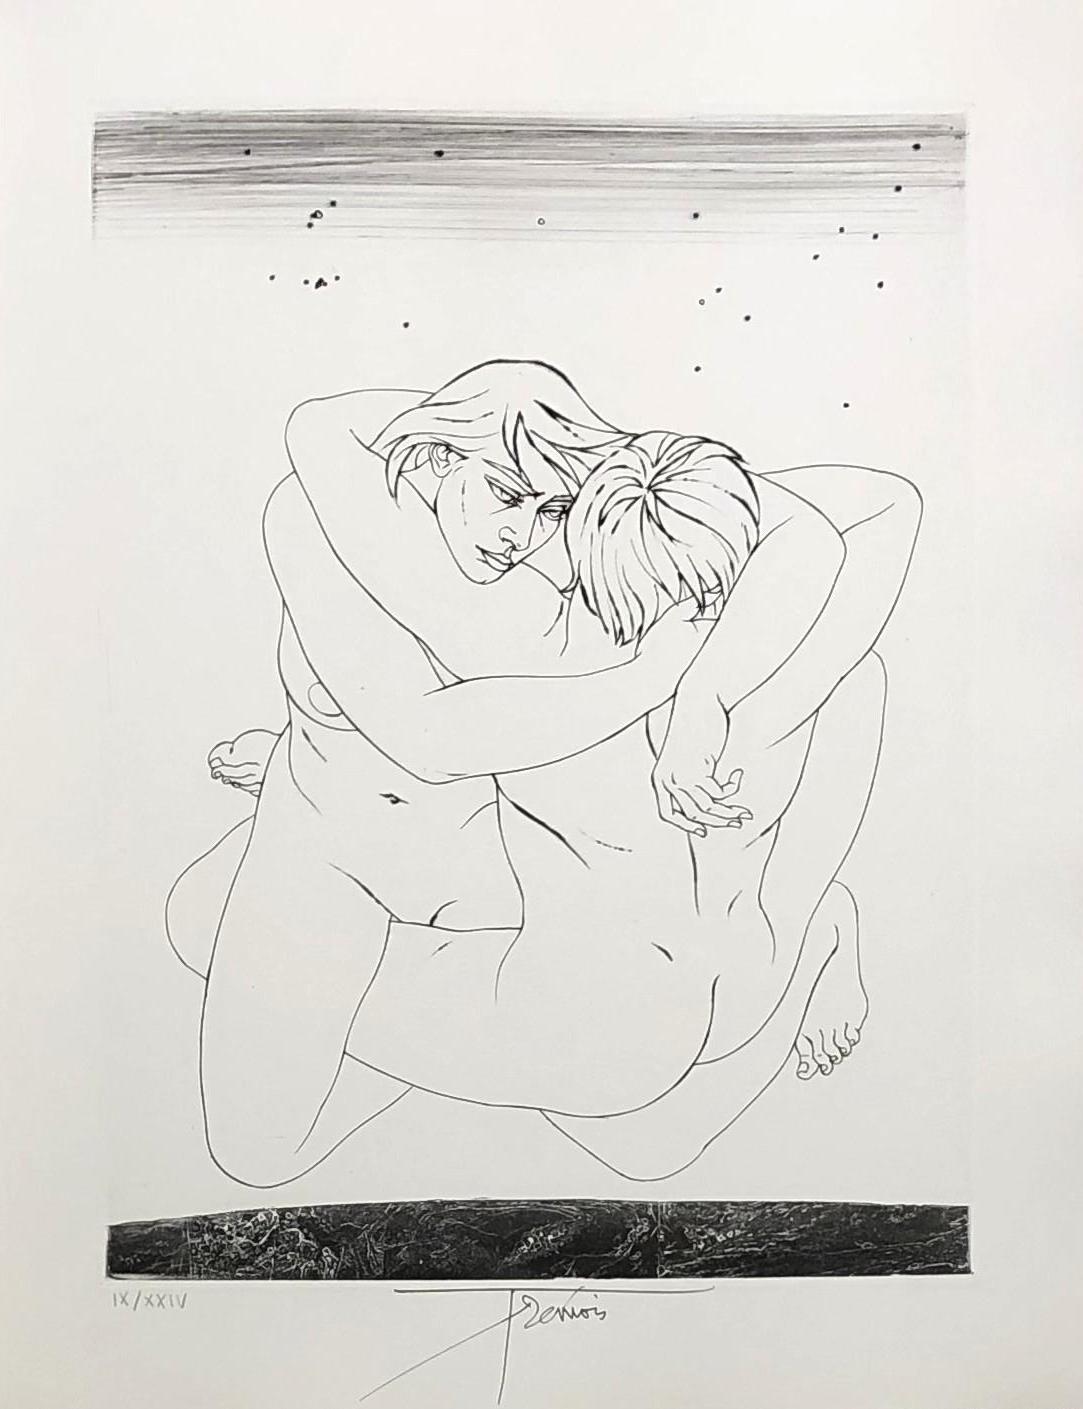 Couple Embraced - Original etching handsigned and numbered